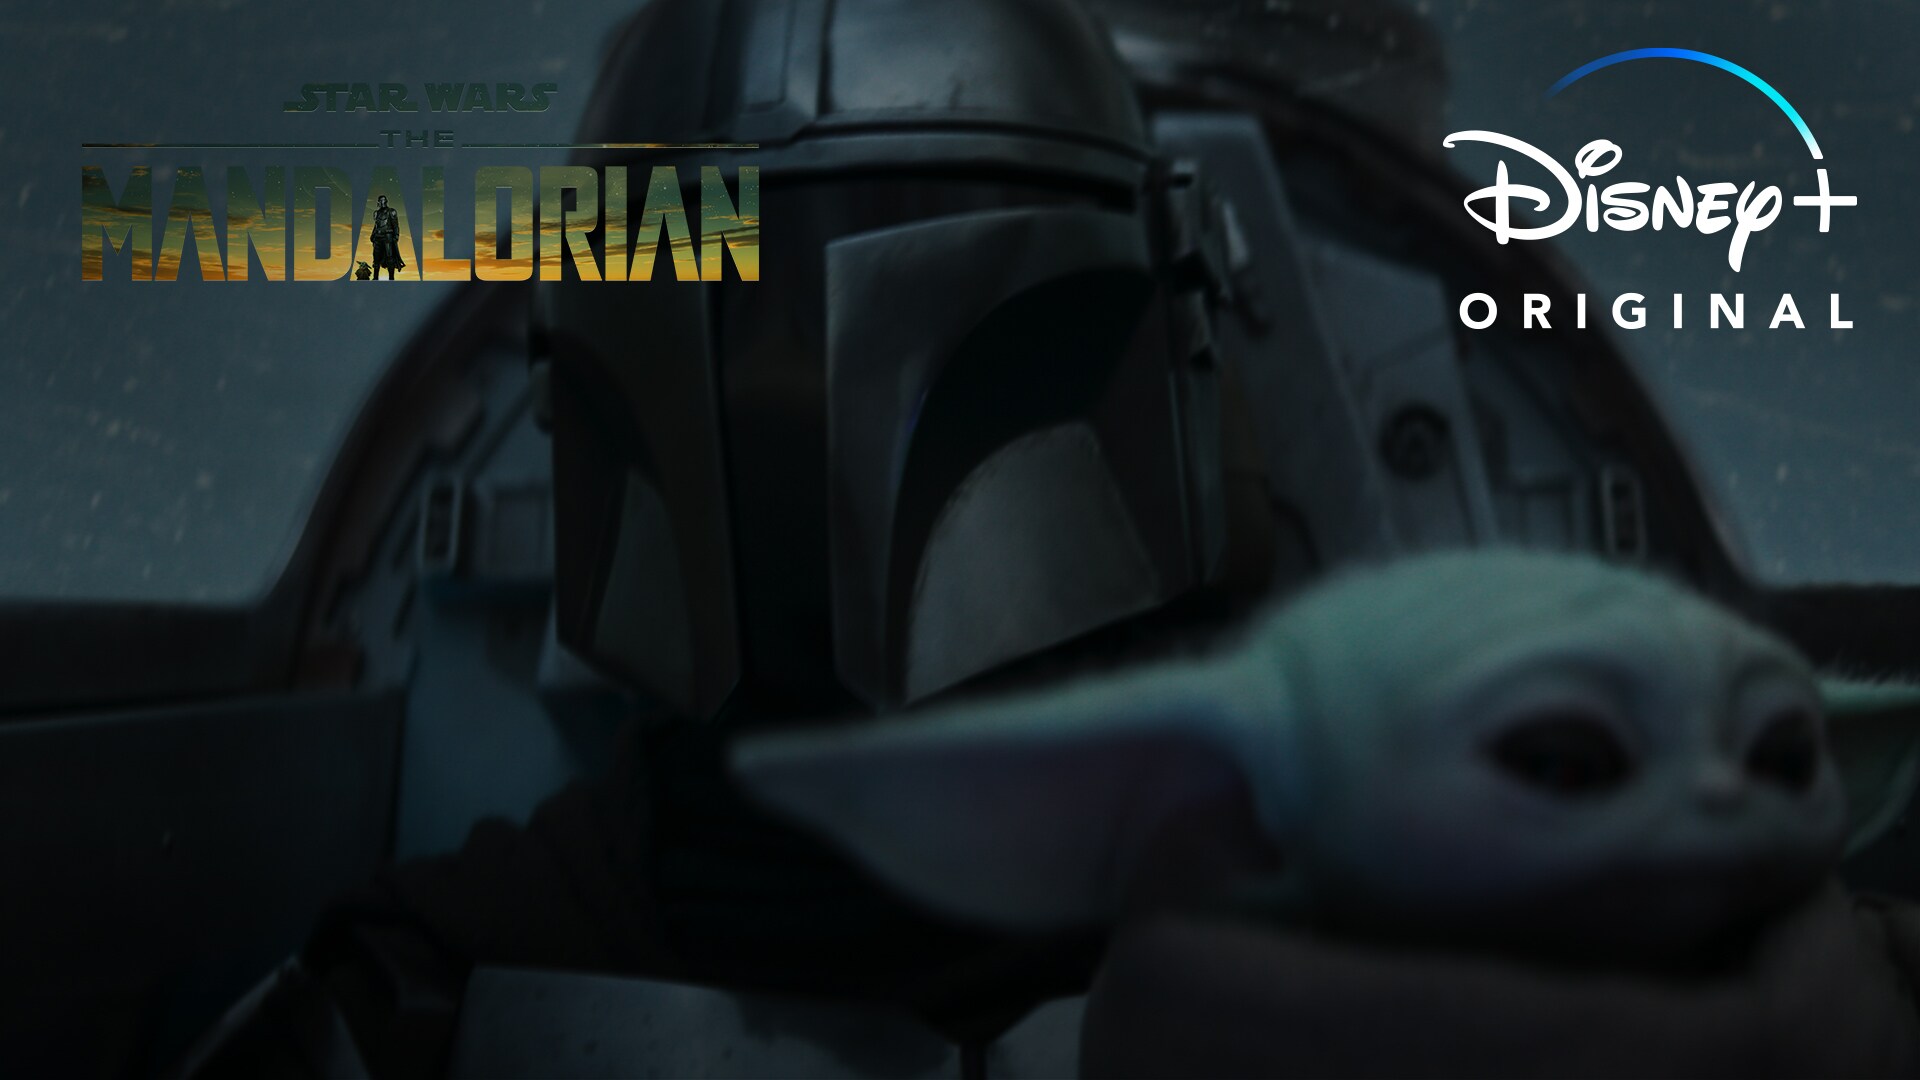 Who We Are | The Mandalorian